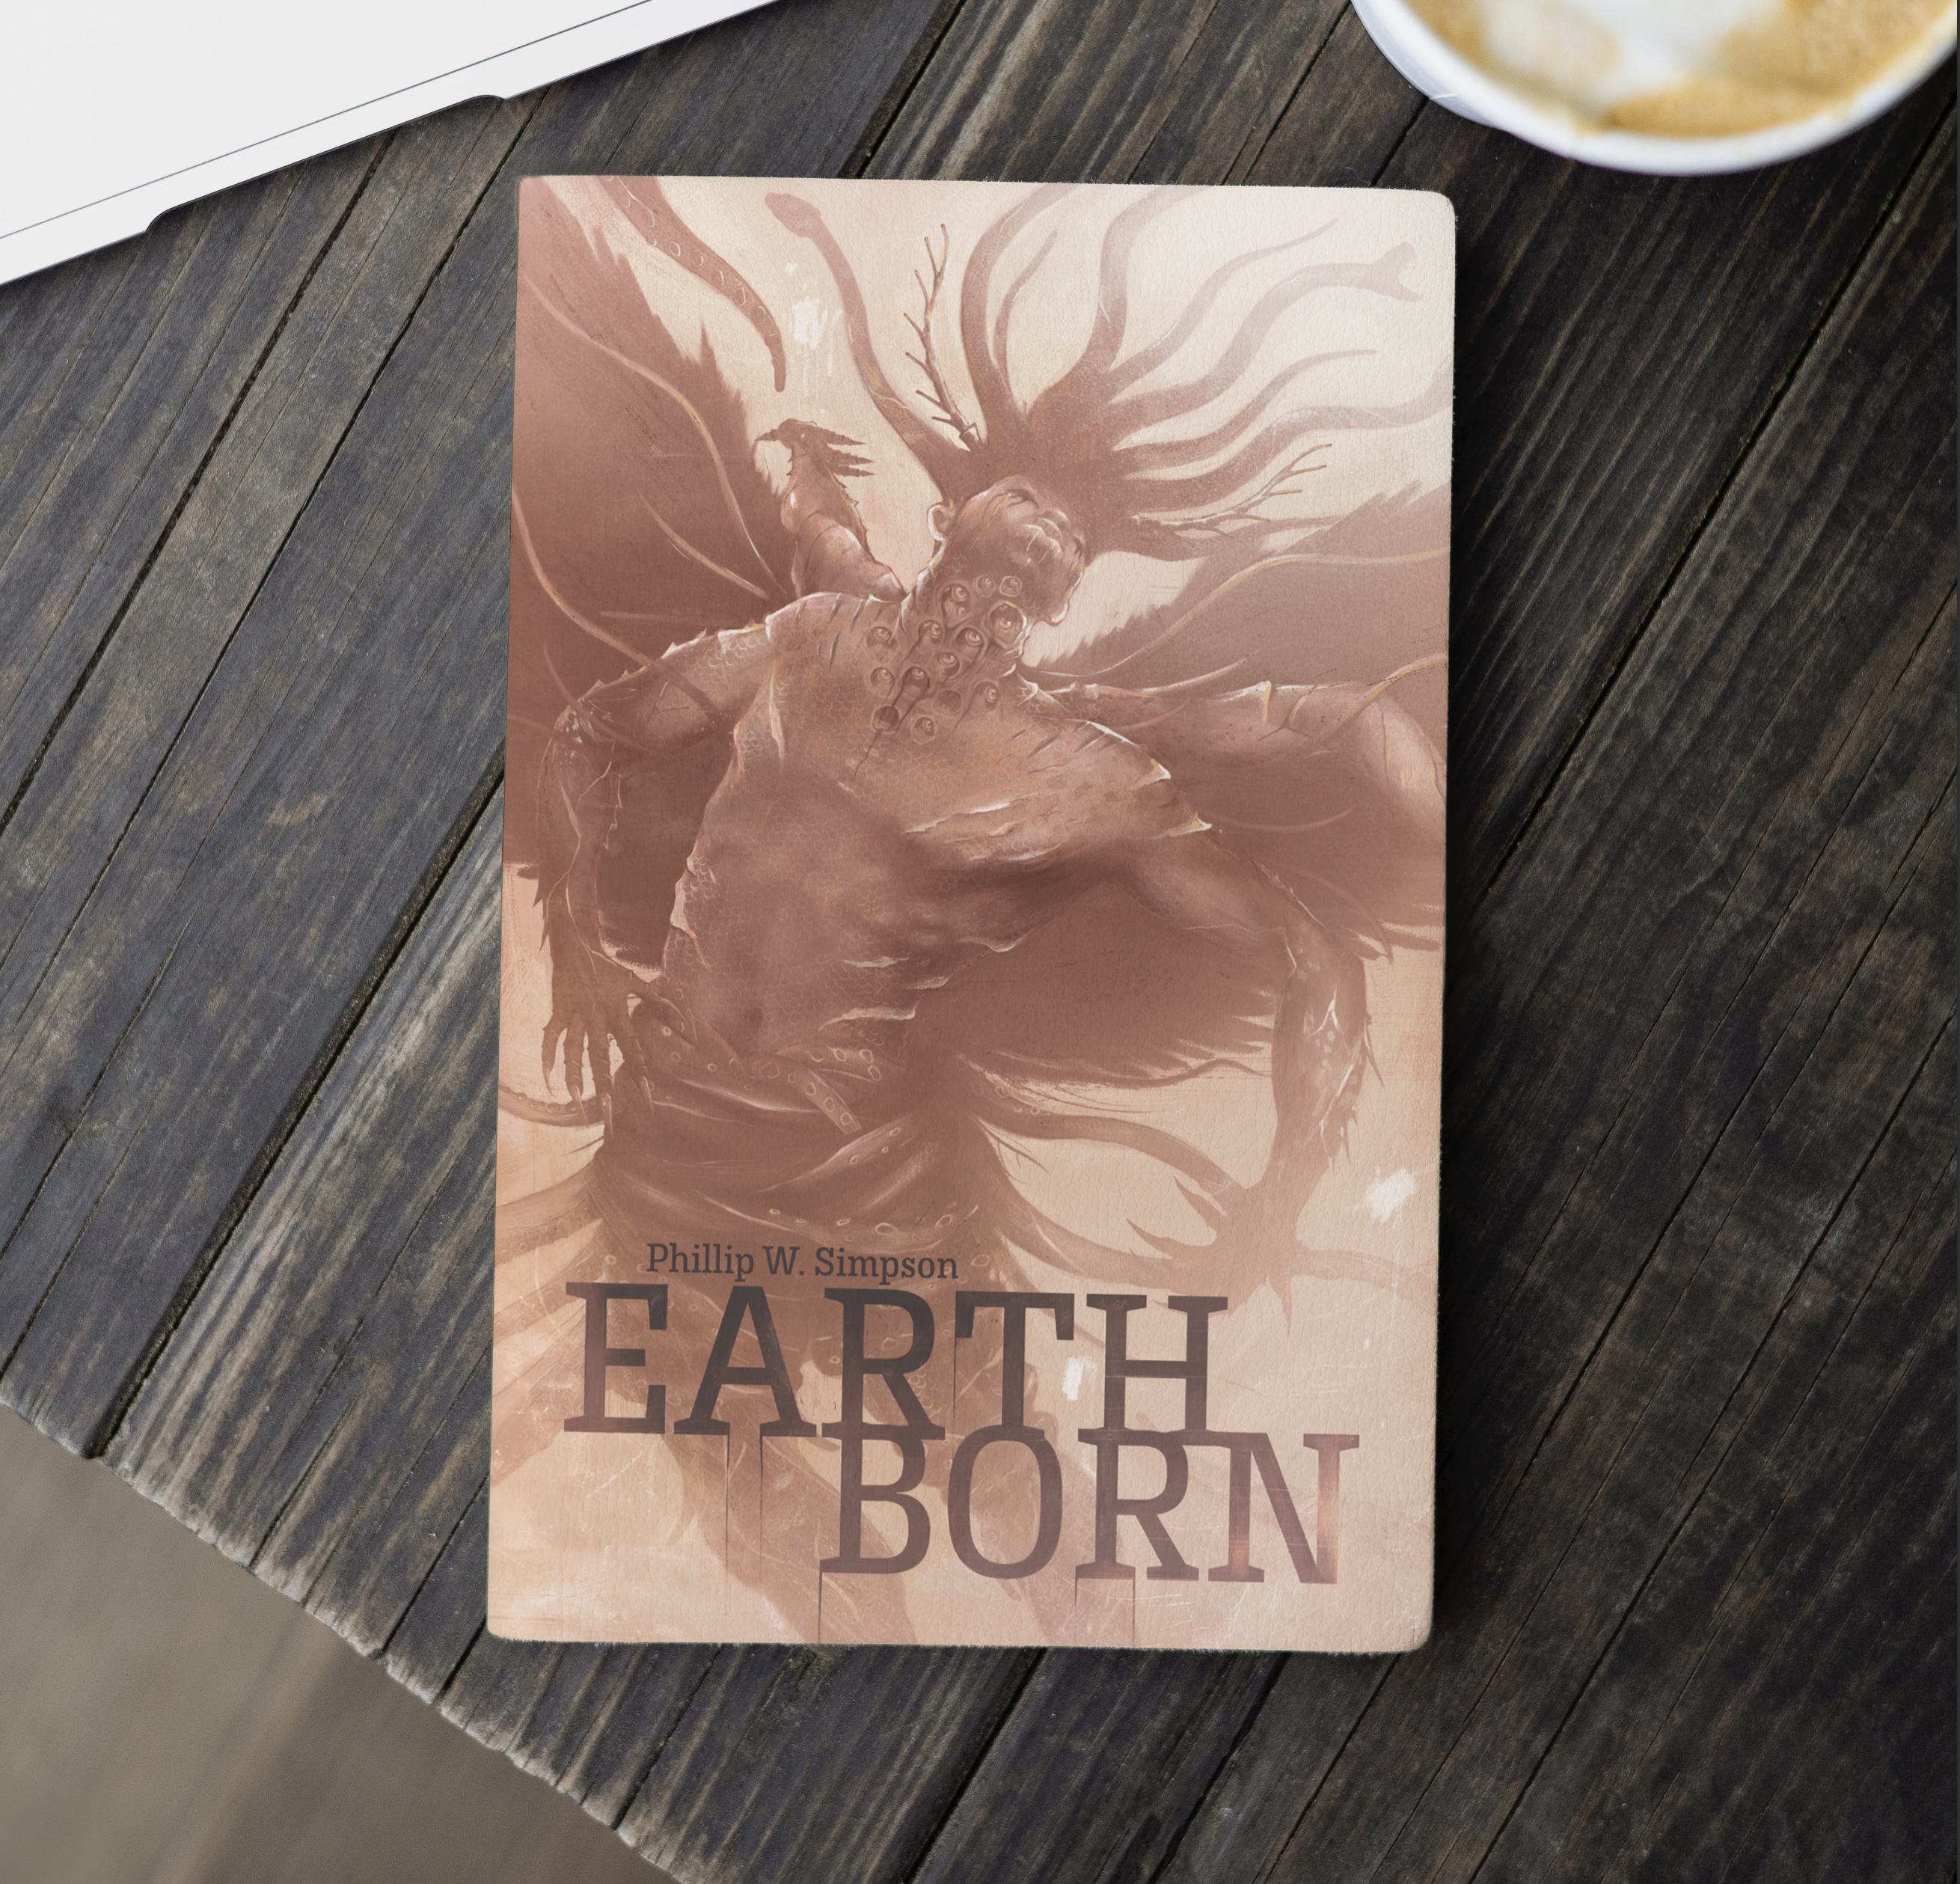 Earthborn – Book Cover